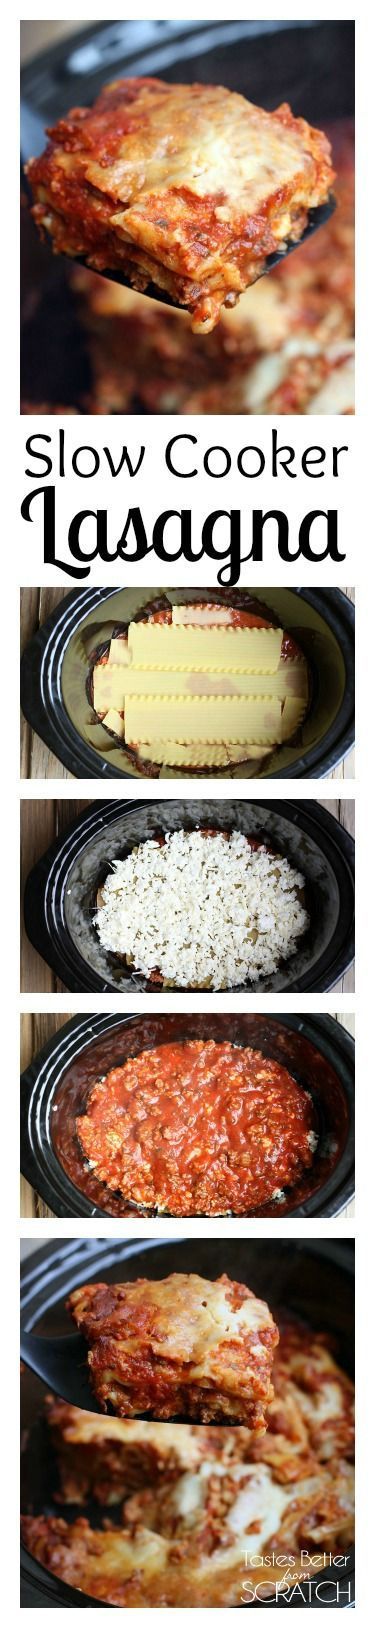 Slow Cooker Lasagna is so easy and yummy! You don’t even have to cook the noodles!